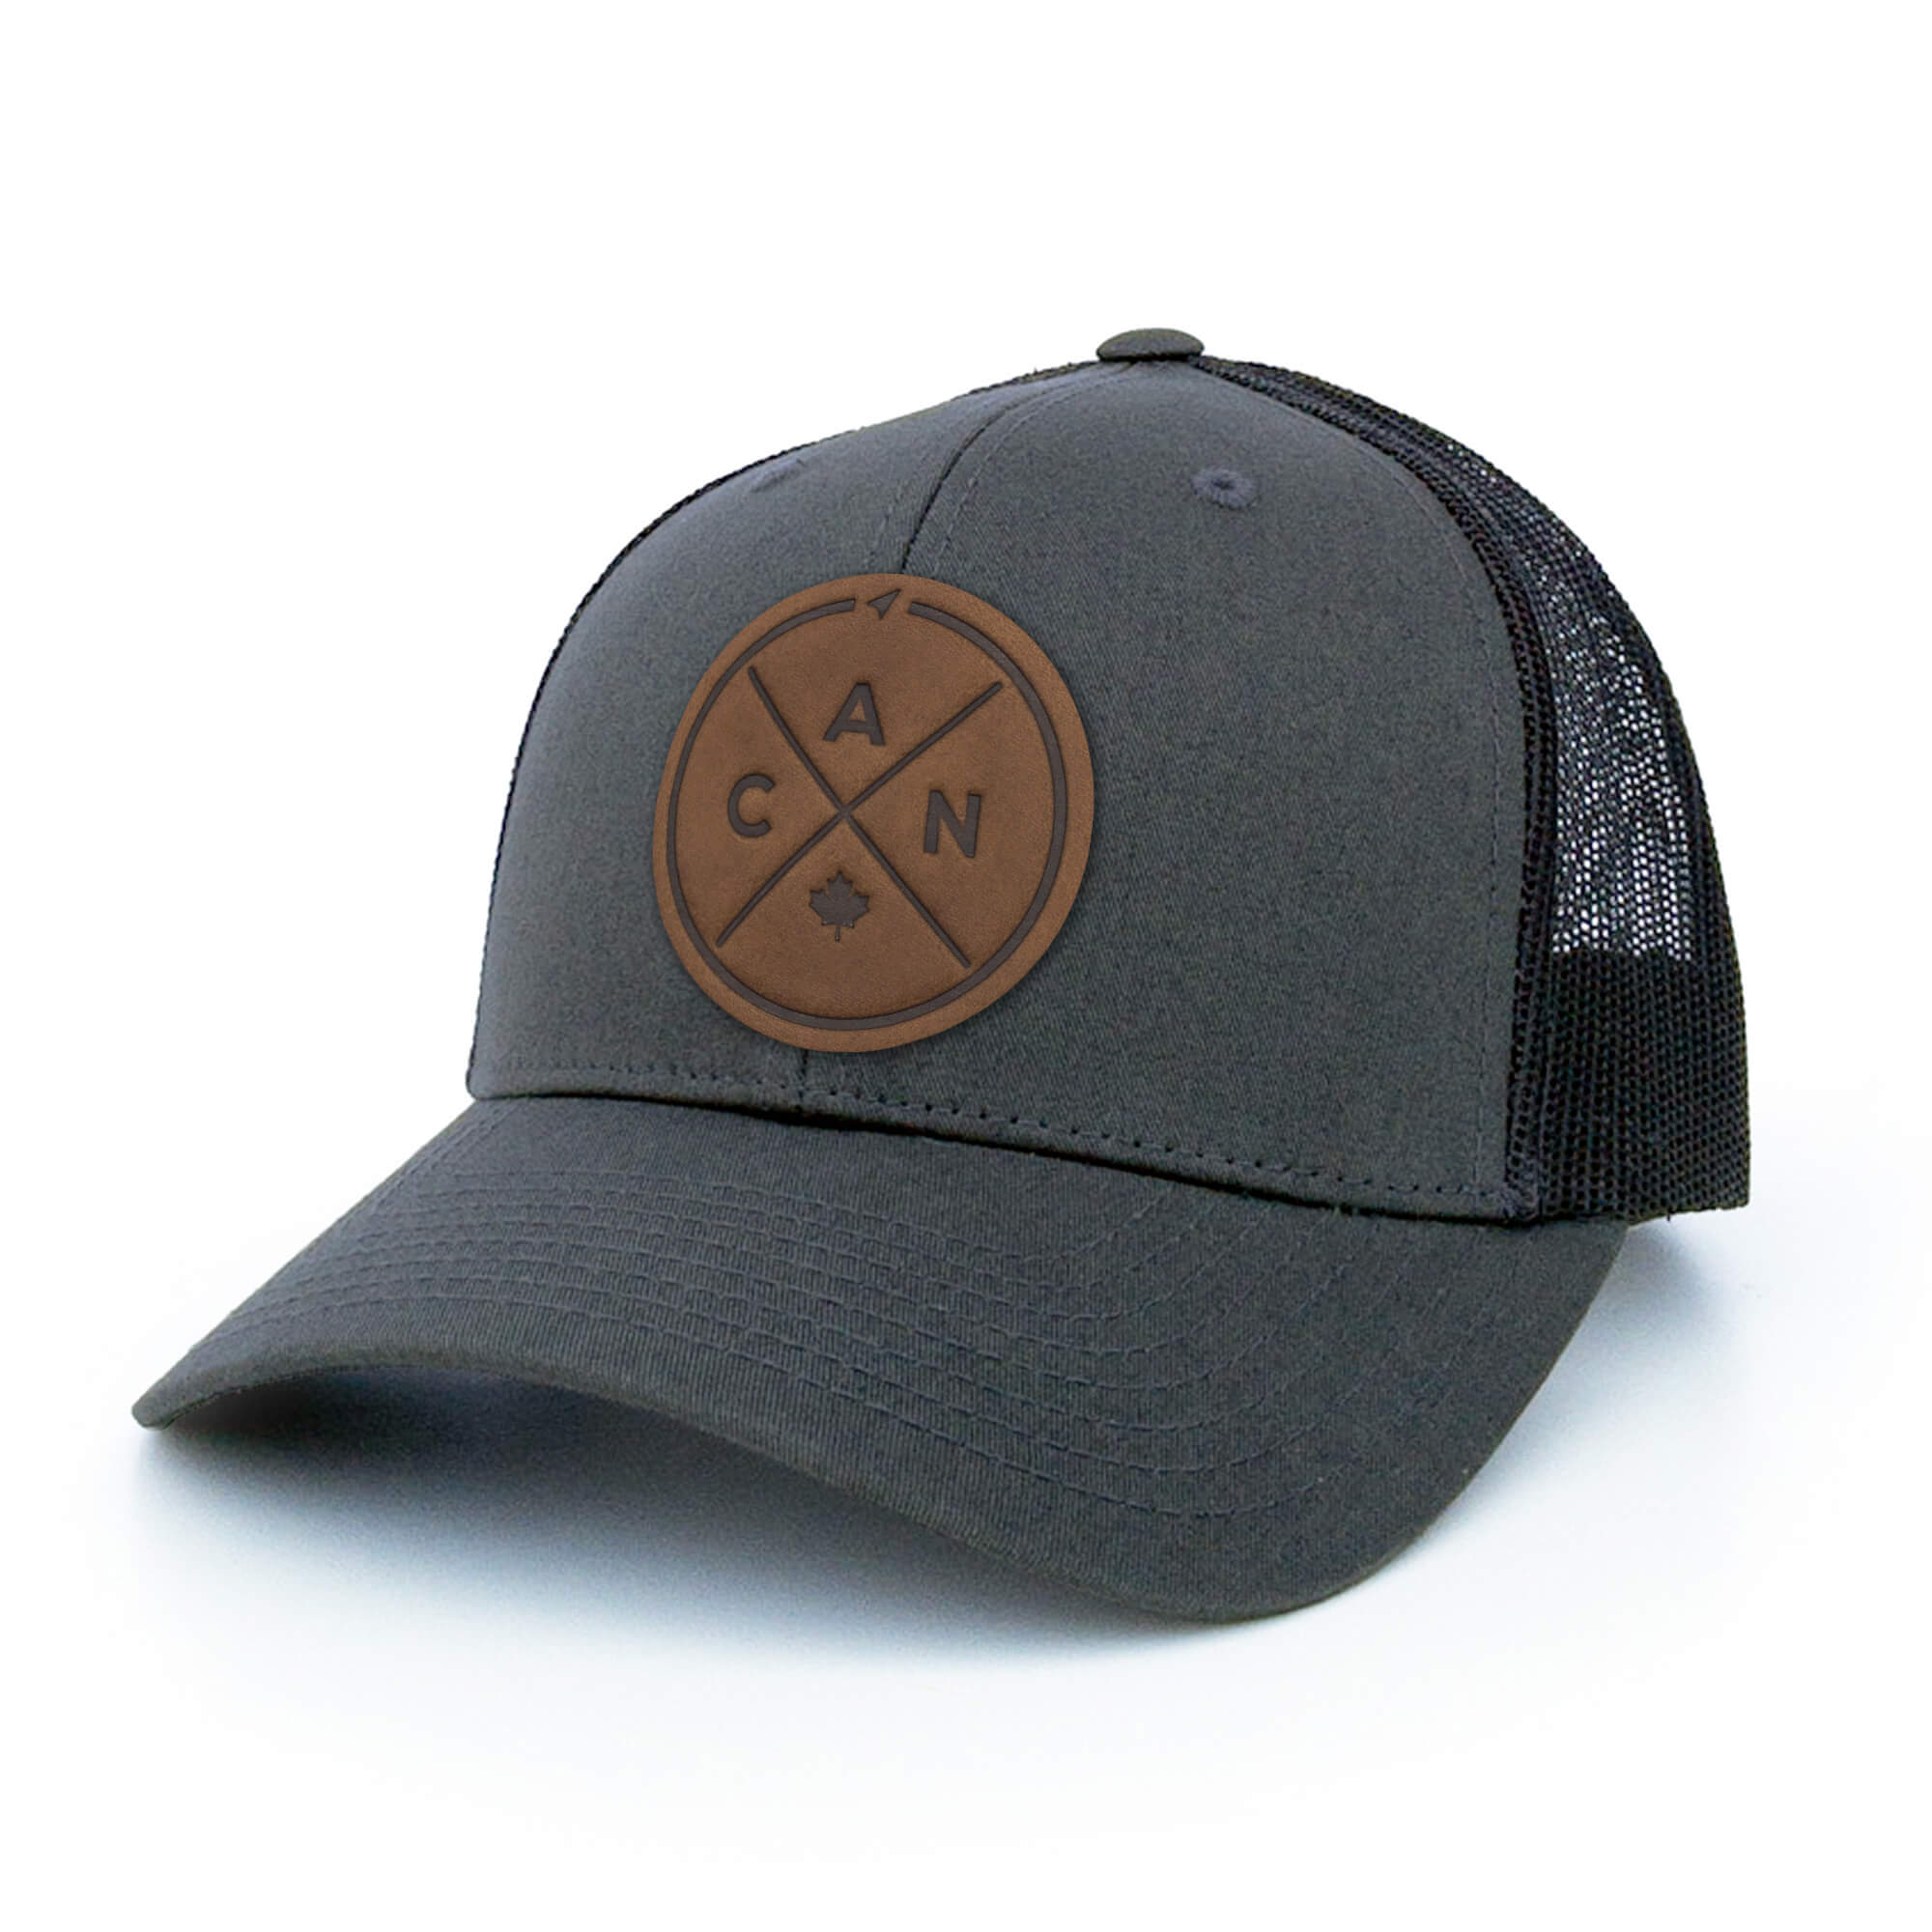 Charcoal trucker hat with full-grain leather patch of Canada Compass | BLACK-002-011, CHARC-002-011, NAVY-002-011, HGREY-002-011, MOSS-002-011, BROWN-002-011, RED-002-011